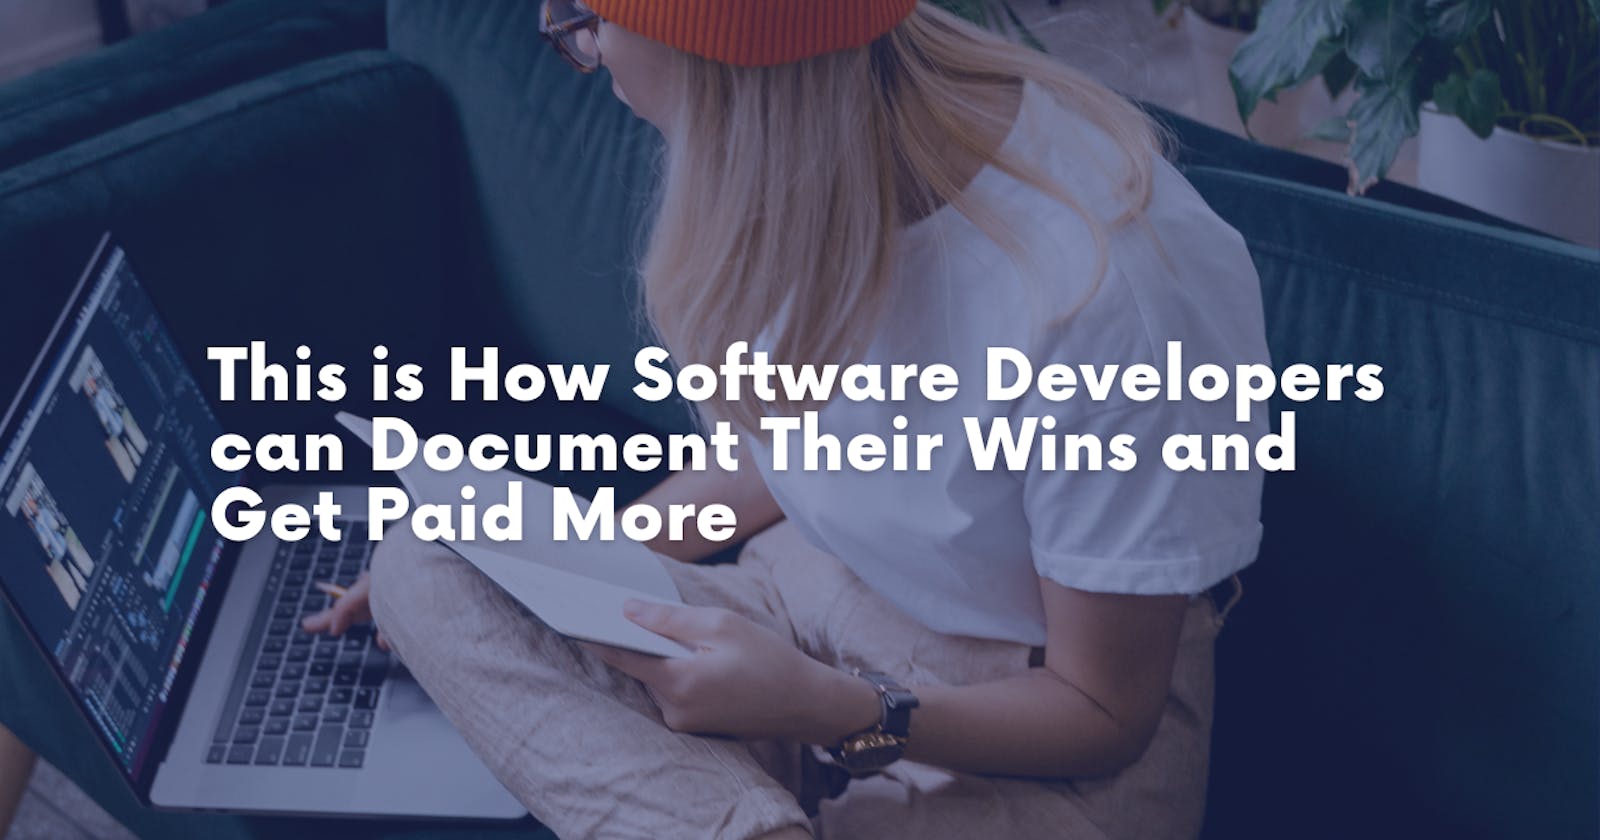 This is How Software Developers can Document Their Wins and Get Paid More